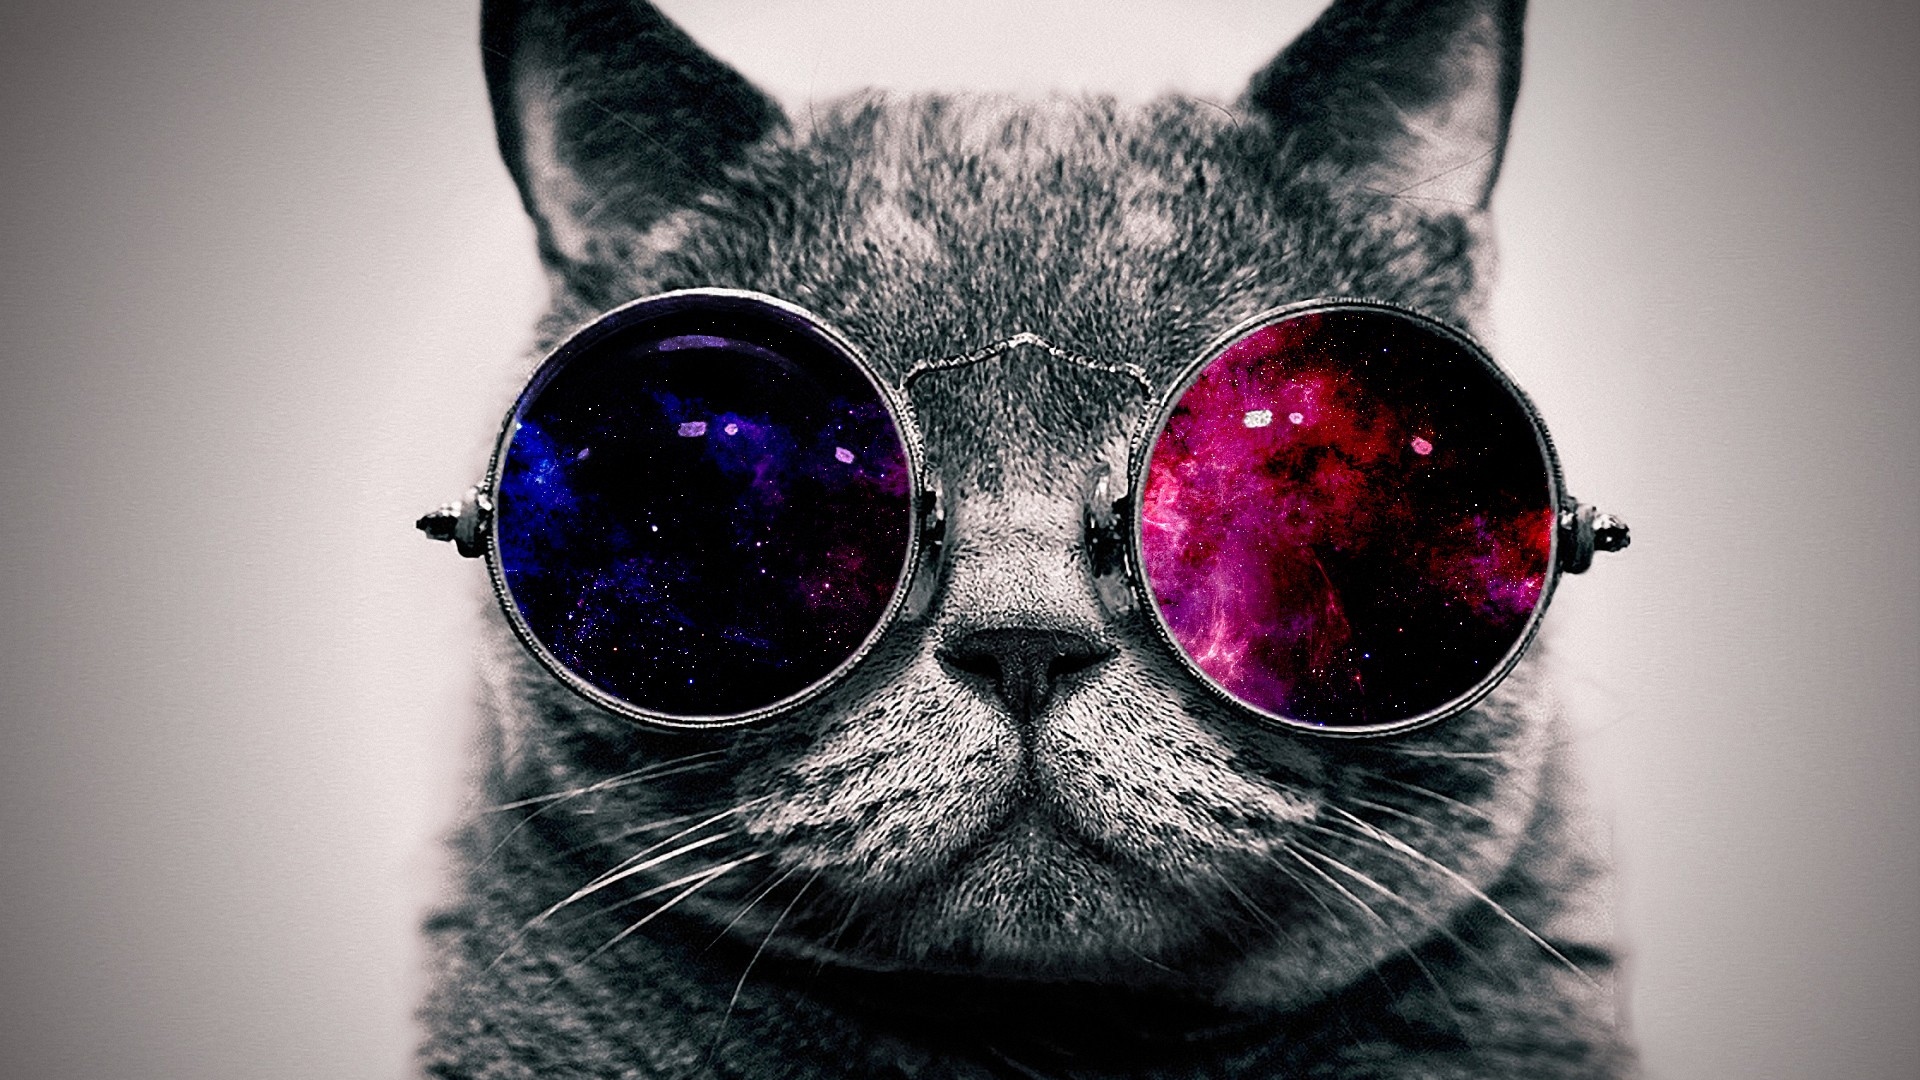 Download Wallpaper 1920x1080 cat face glasses thick Full HD 1080p